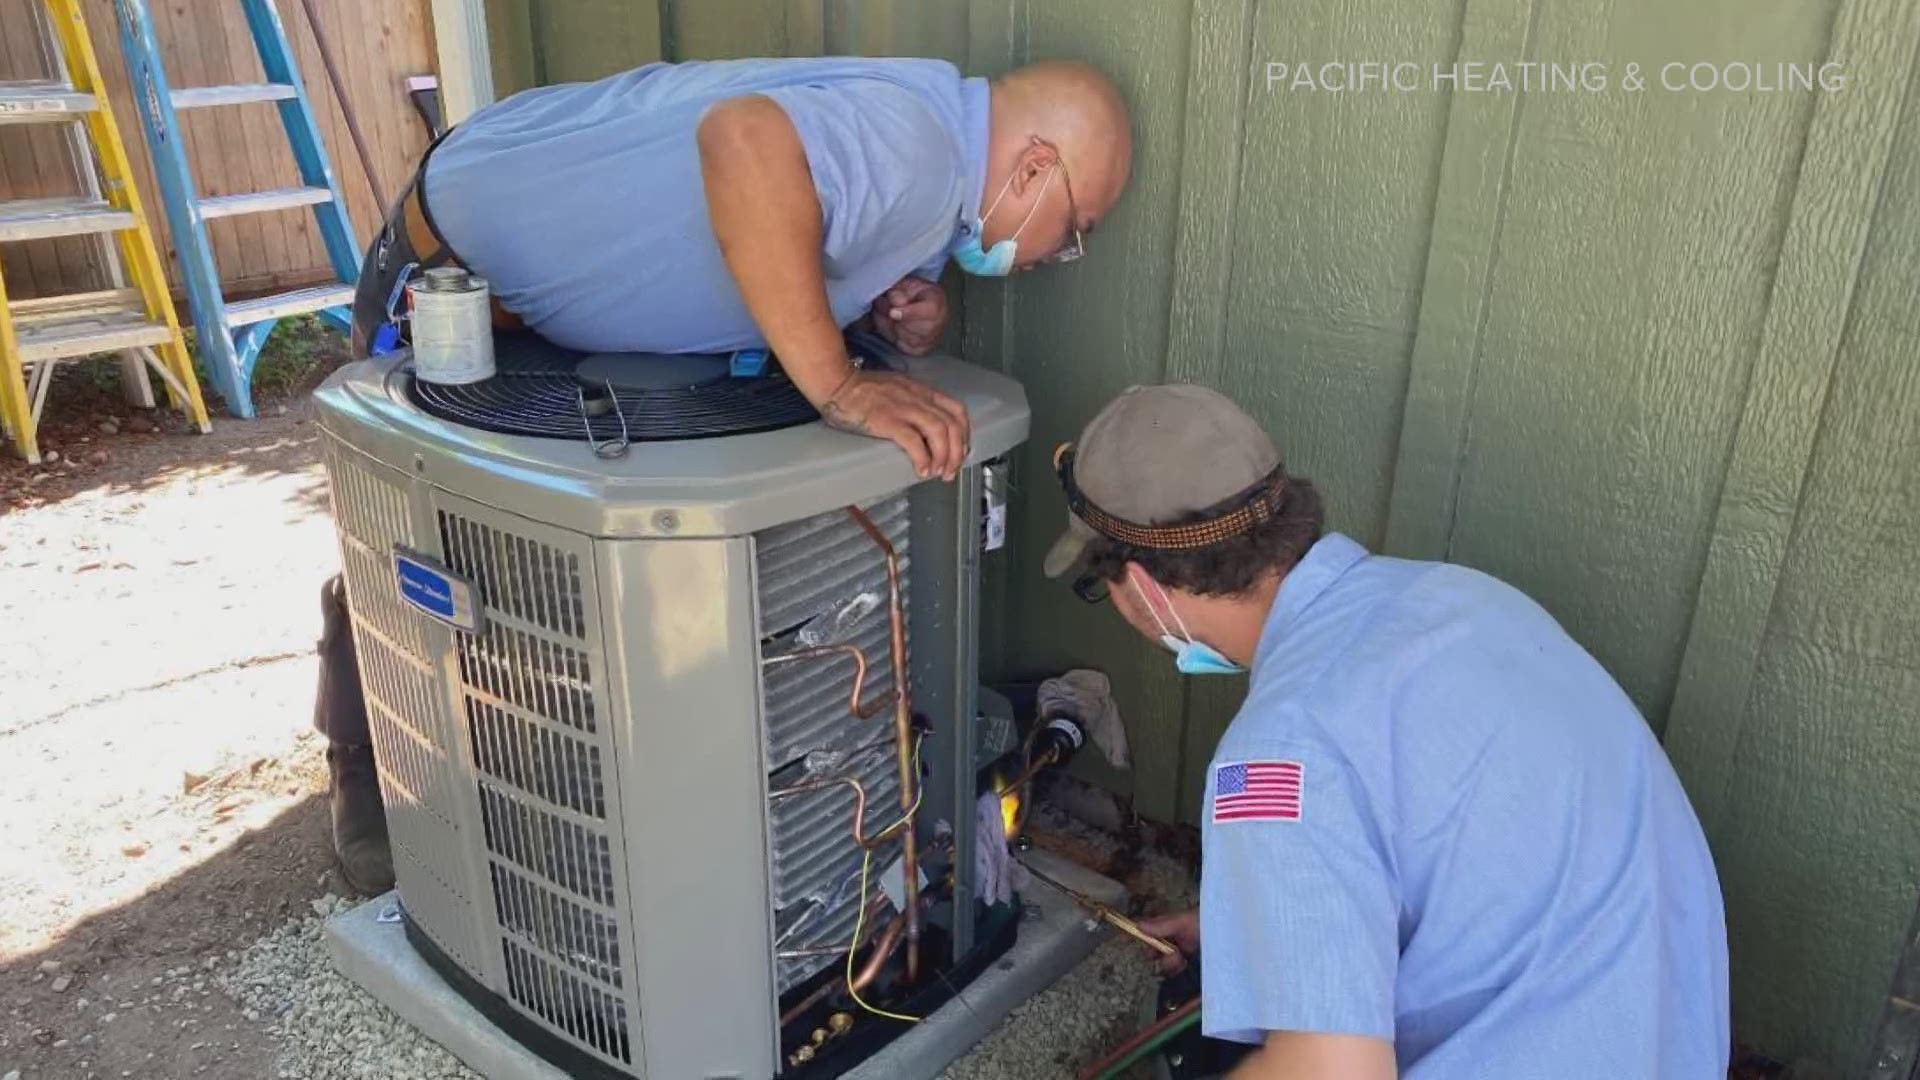 As record high temperatures bake the northwest, installers are finding it hard to keep up with the sudden demand for air conditioning.